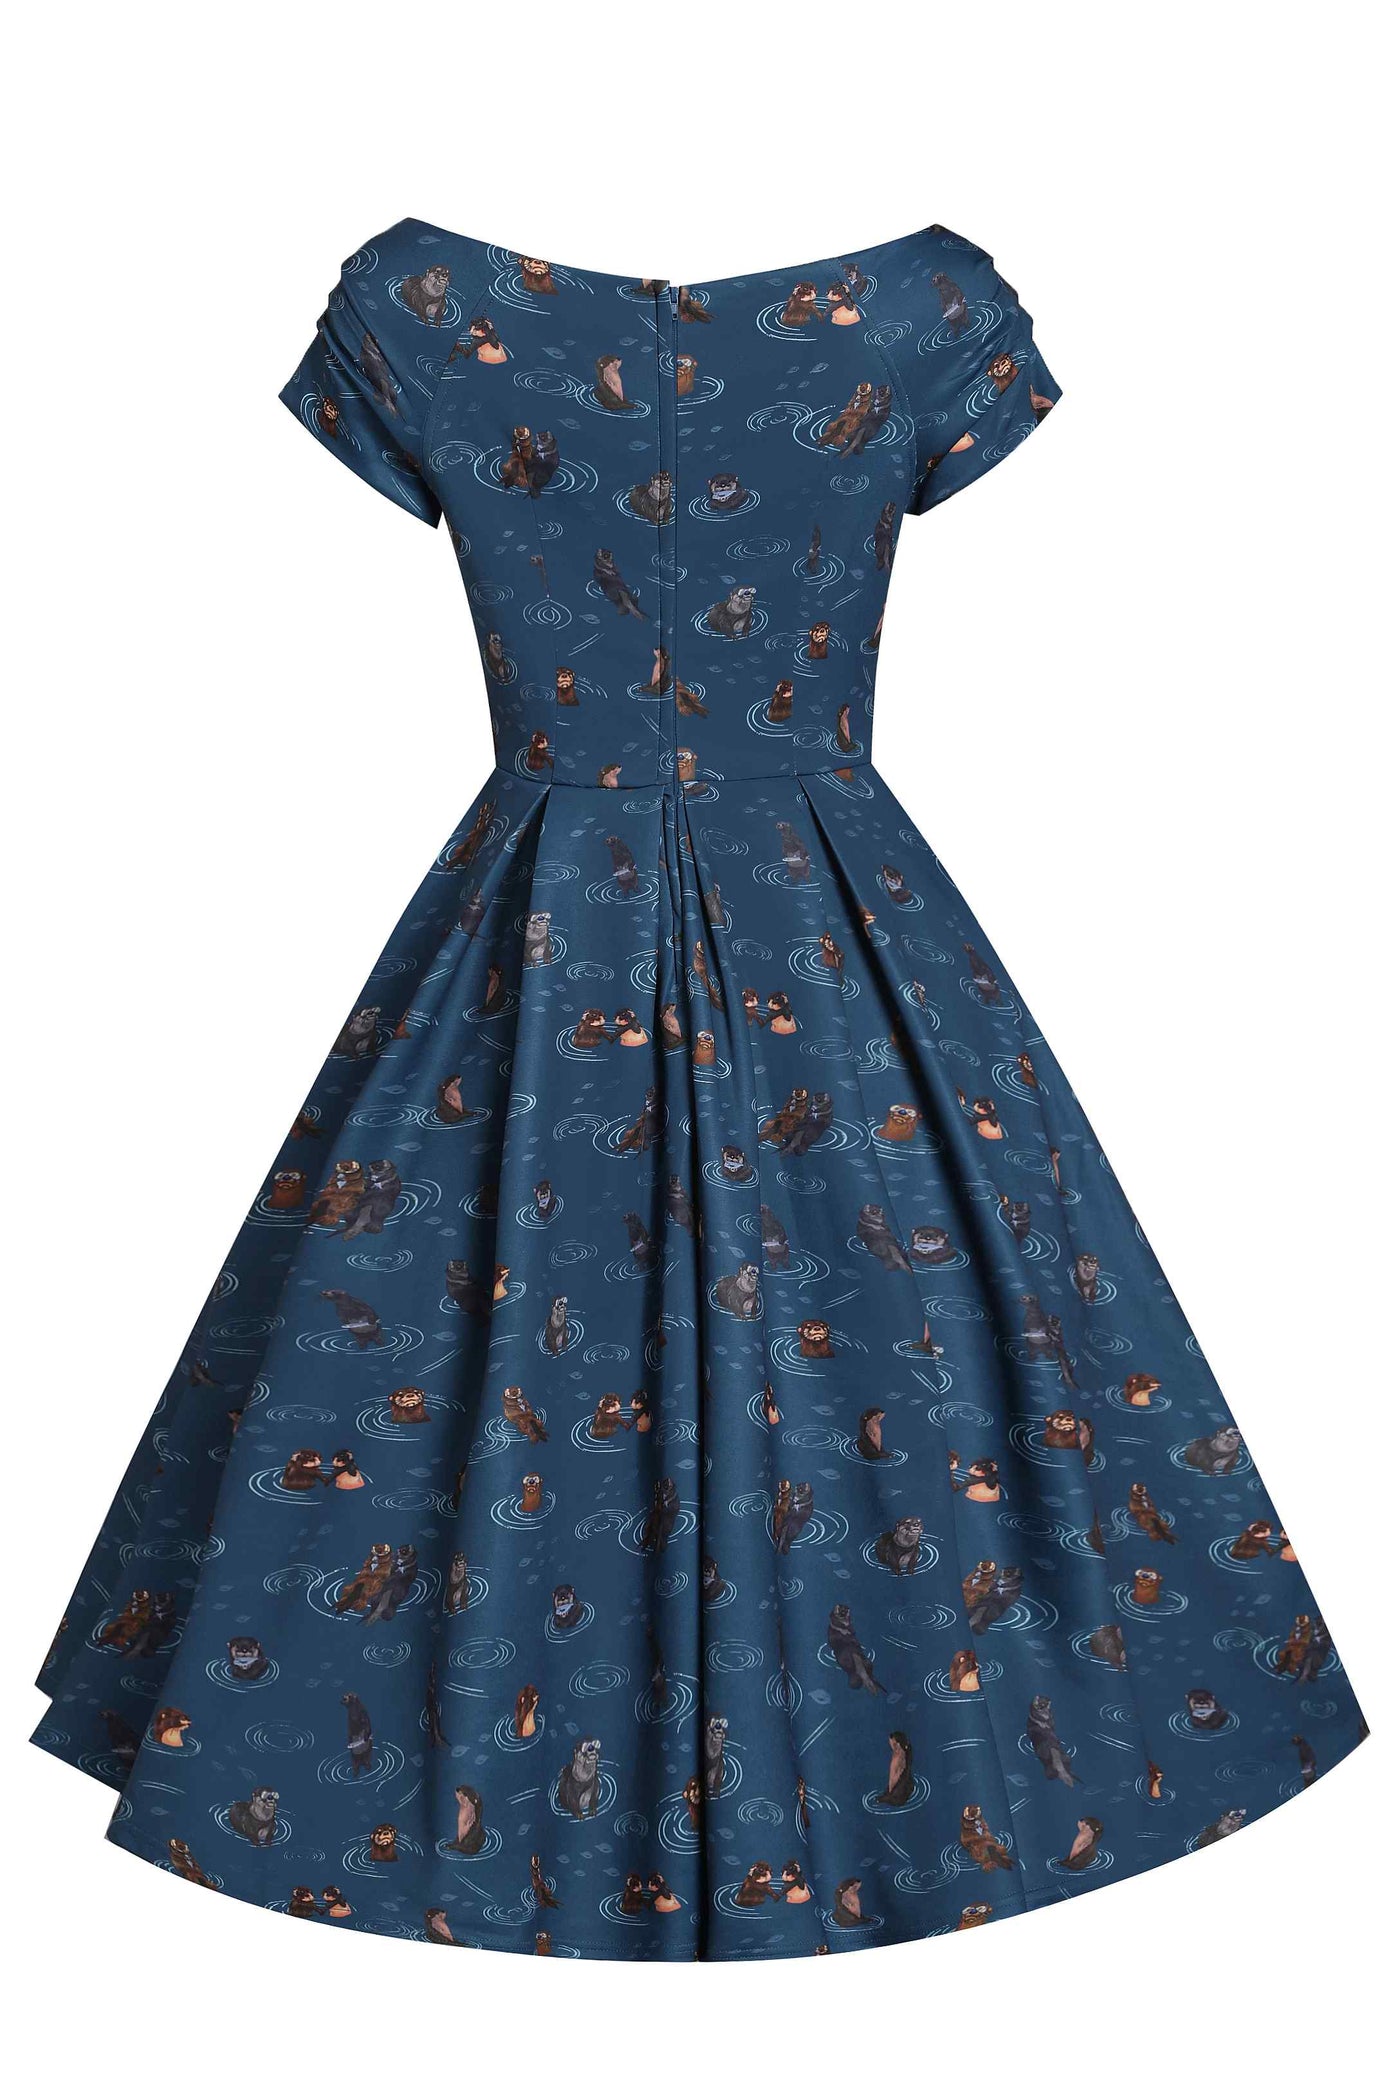 Back View of Otter Print Off-Shoulder Circle Dress in Blue